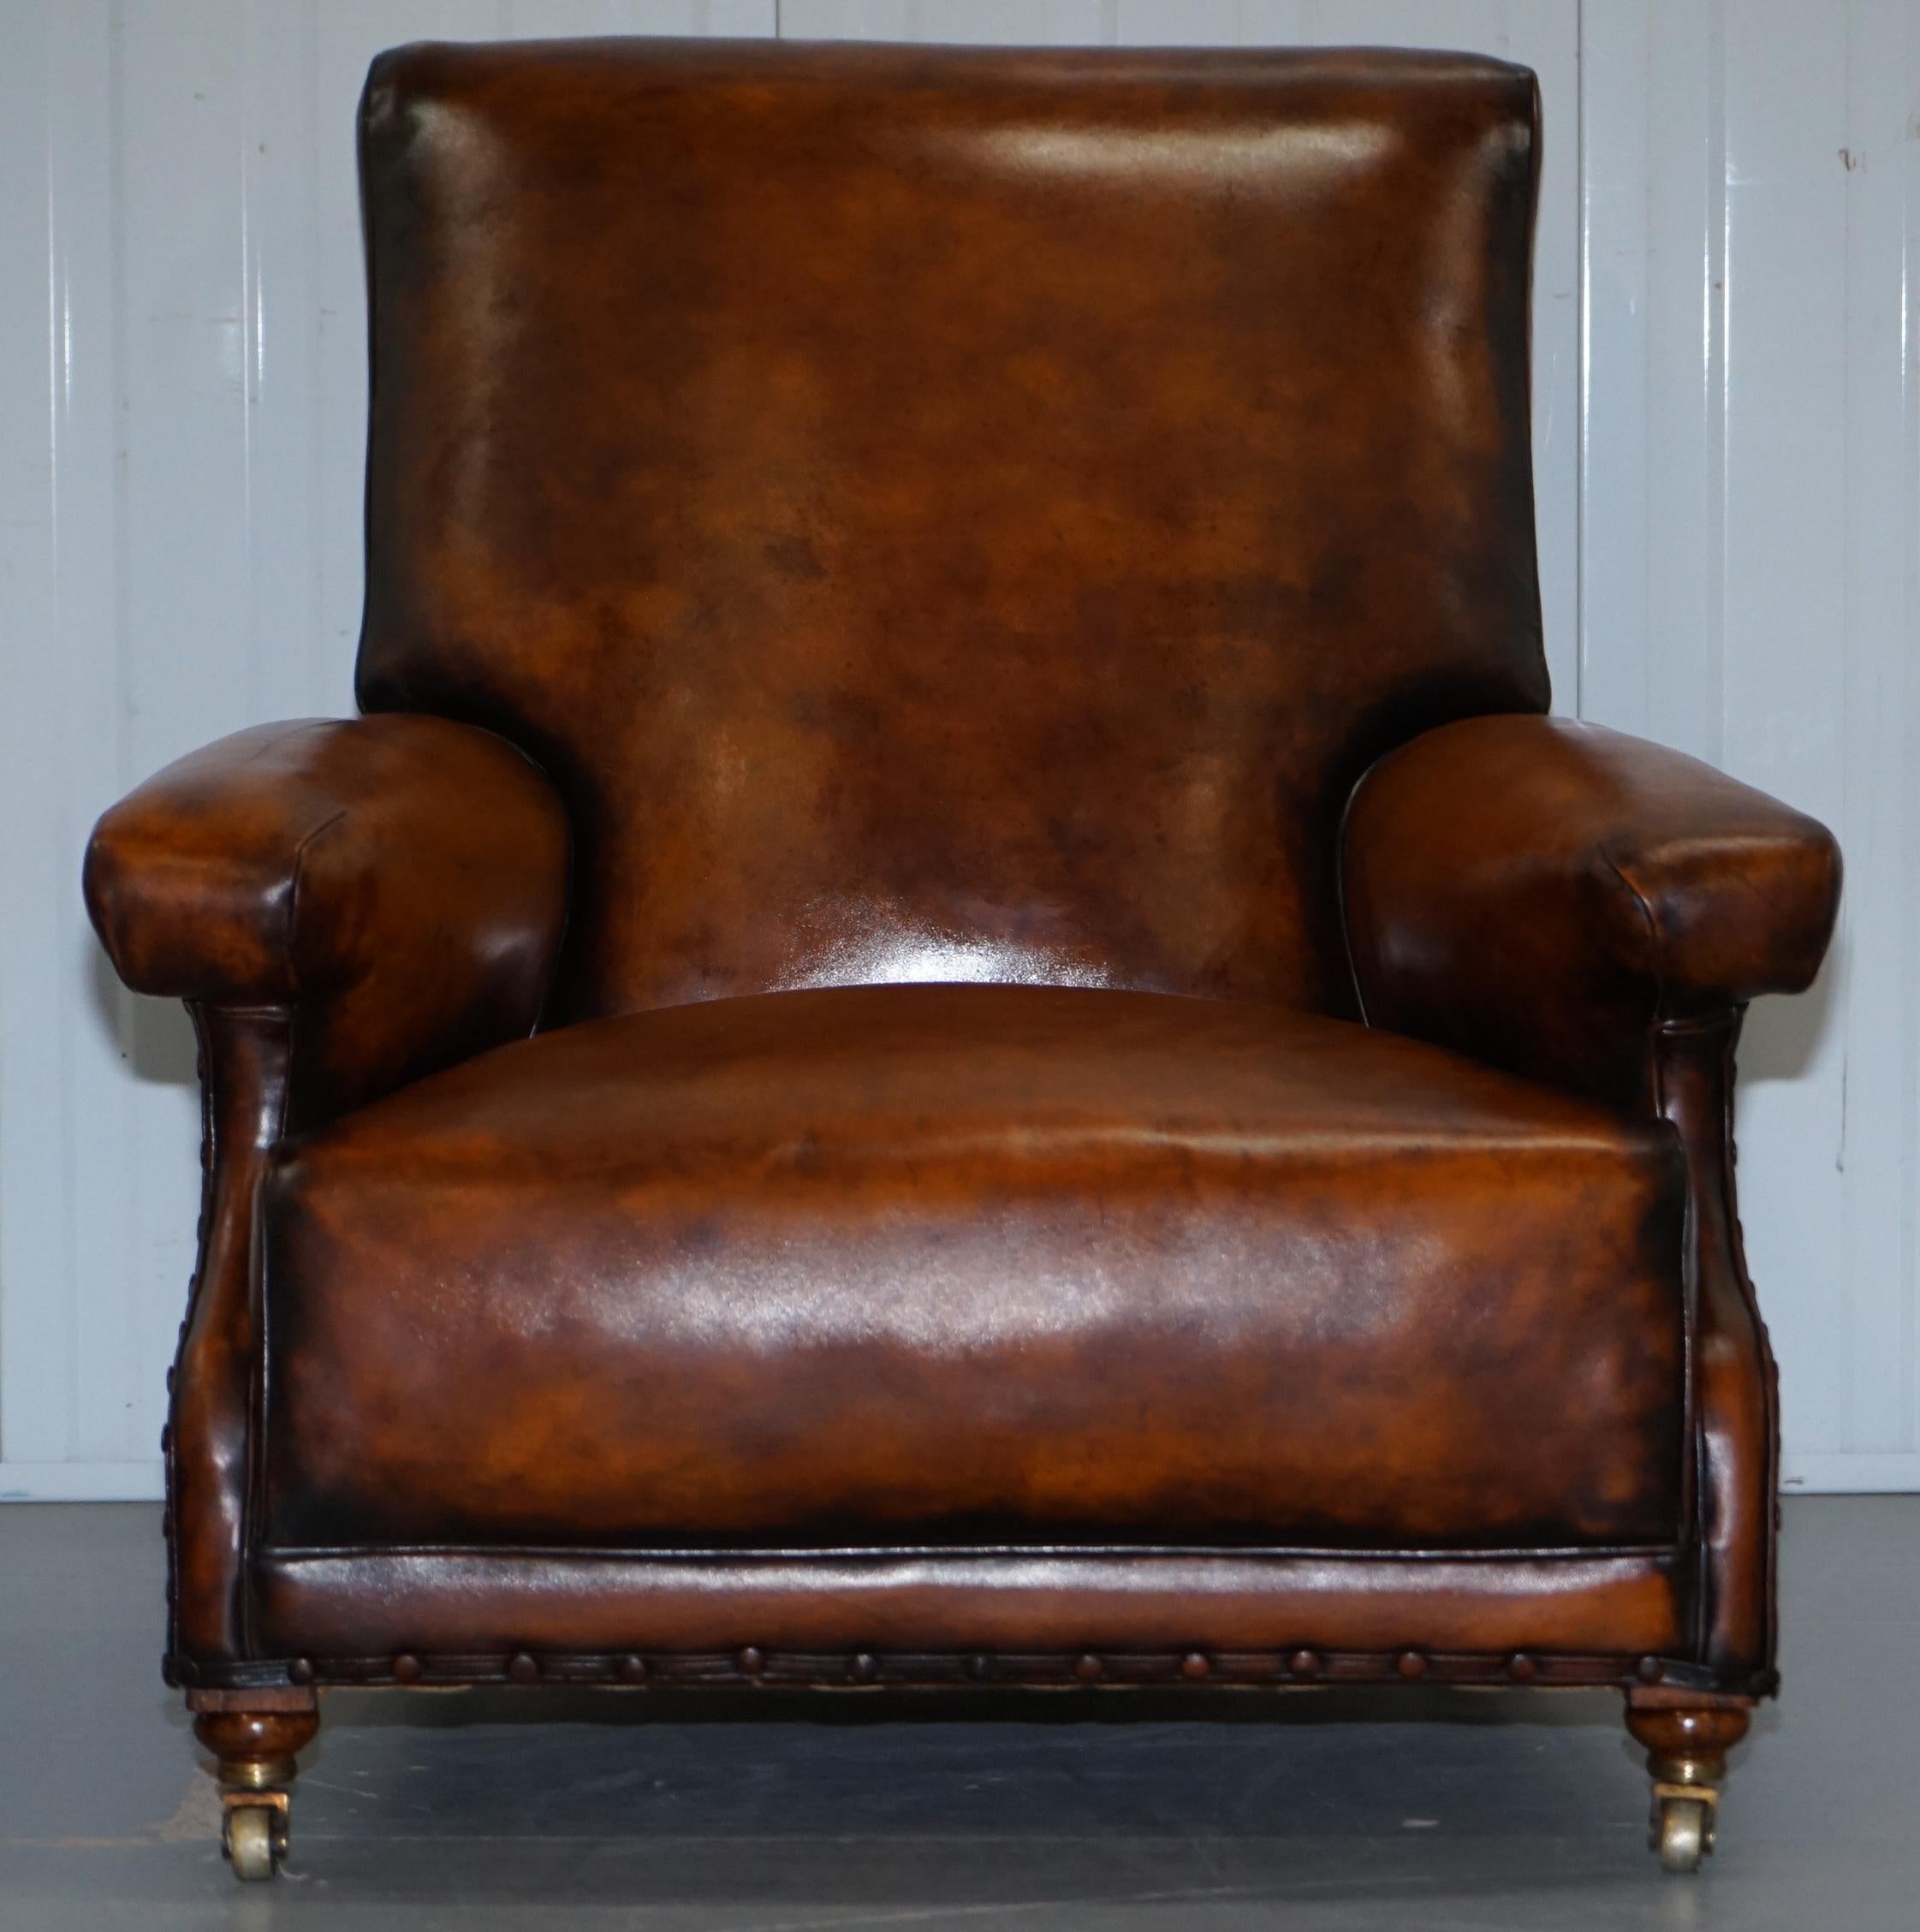 English Fully Stamped Original Victorian Walnut & Brown Leather Howard & Son's Armchair